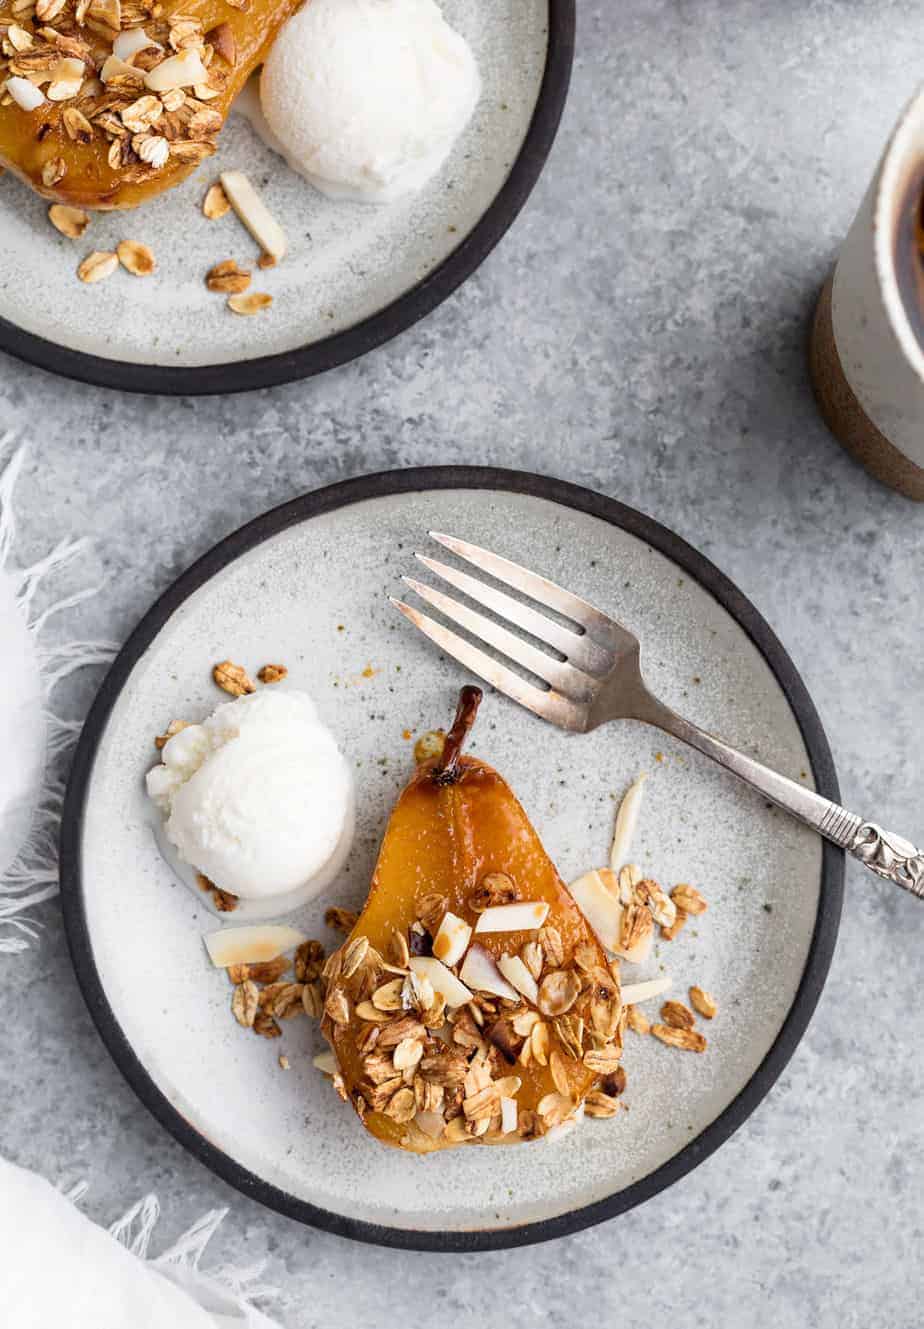 Baked Pears with Maple Syrup and Homemade Granola Illy Coffee